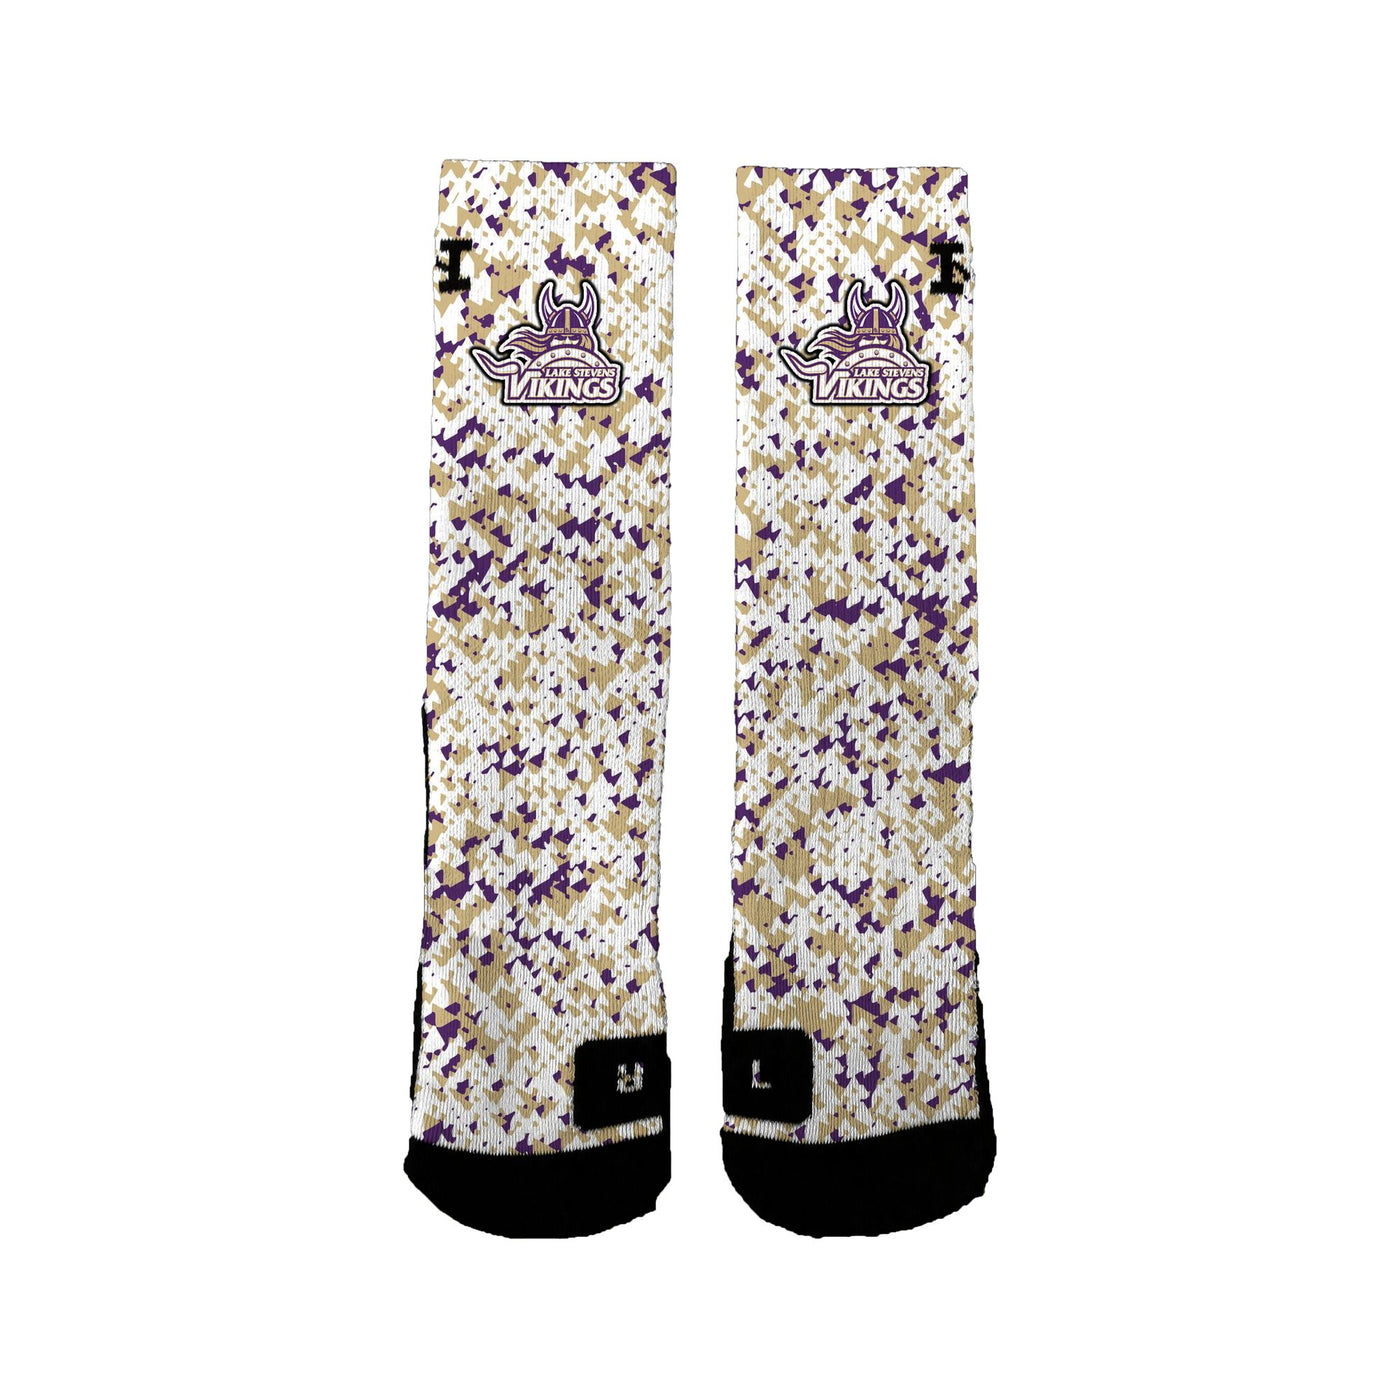 Lake Stevens Volleyball Purple And Gold Speckles Socks